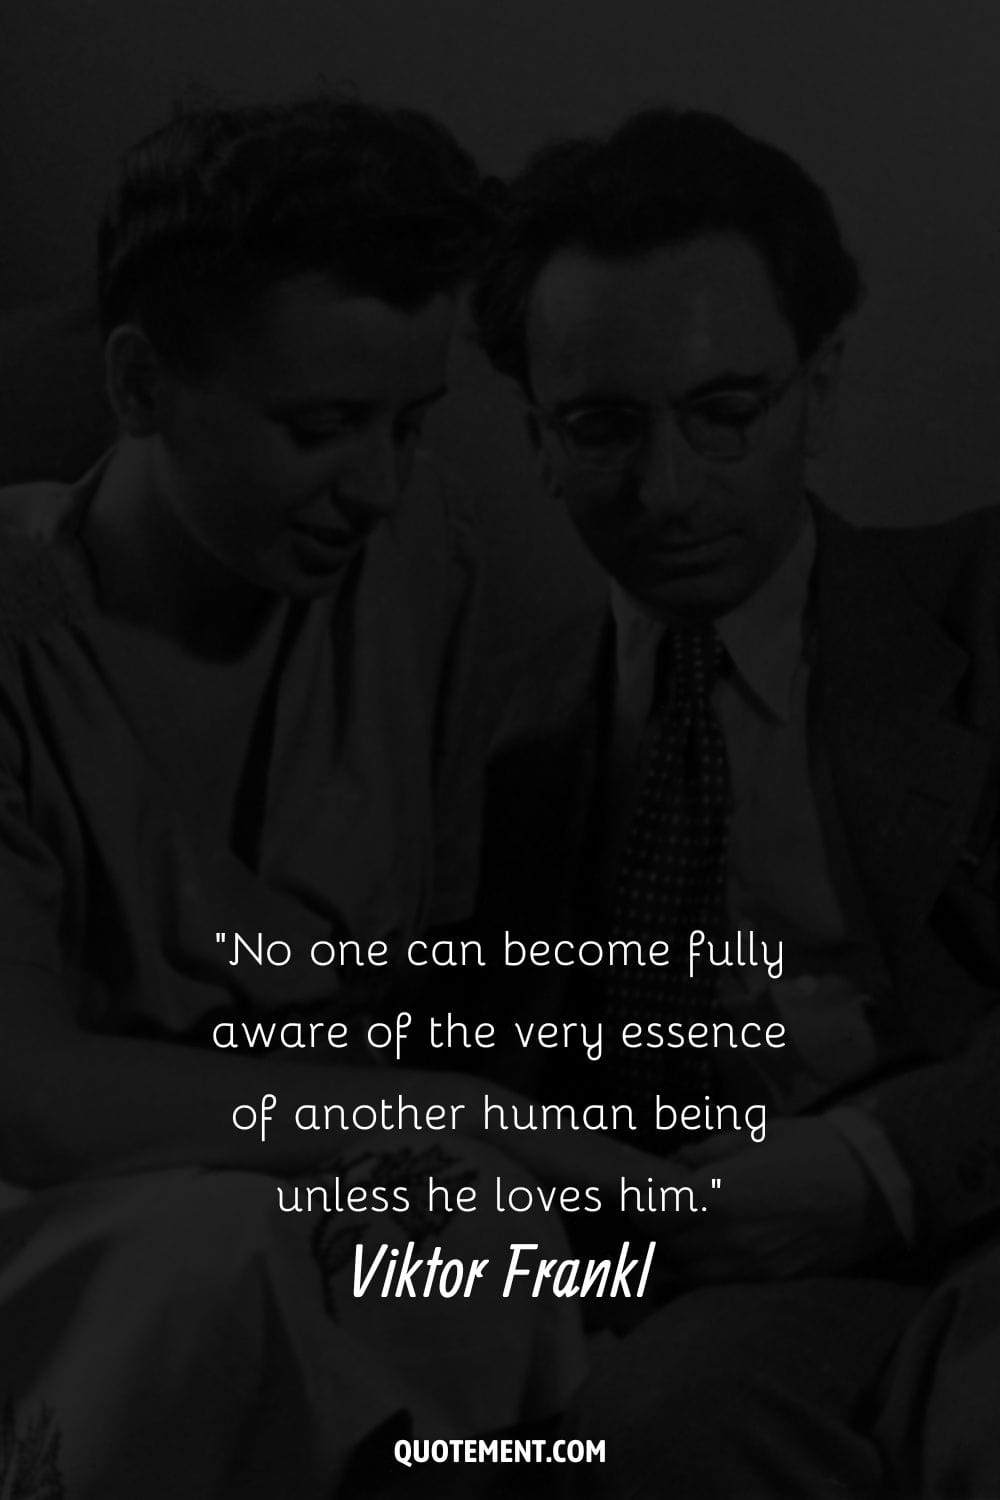 Viktor Frankl next to his wife representing his famous quote on love.